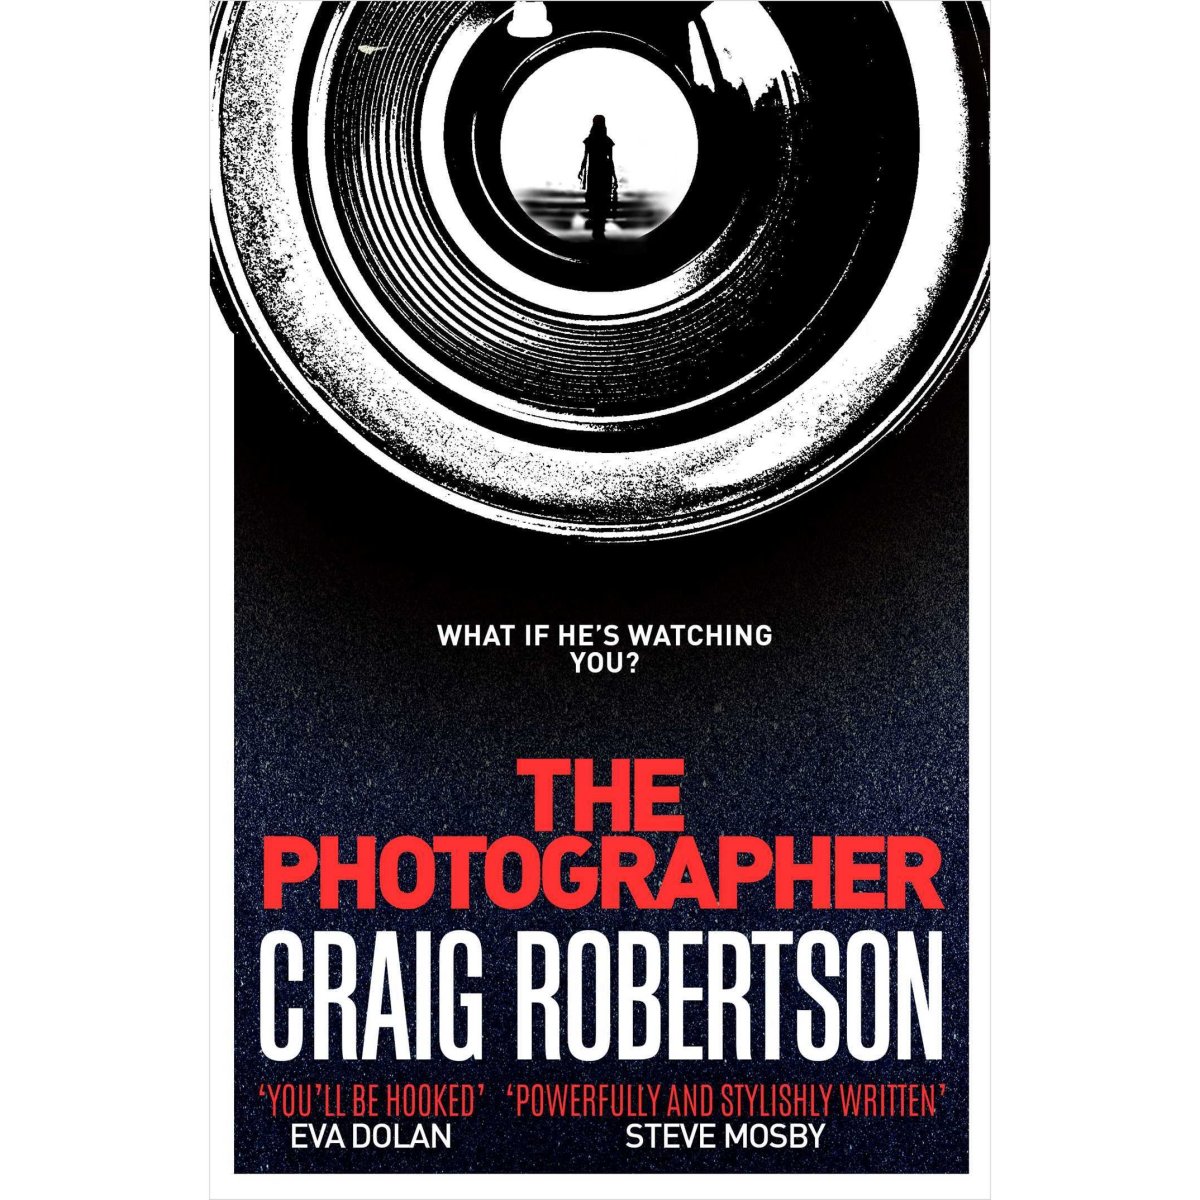 The Photographer by Craig Robertson